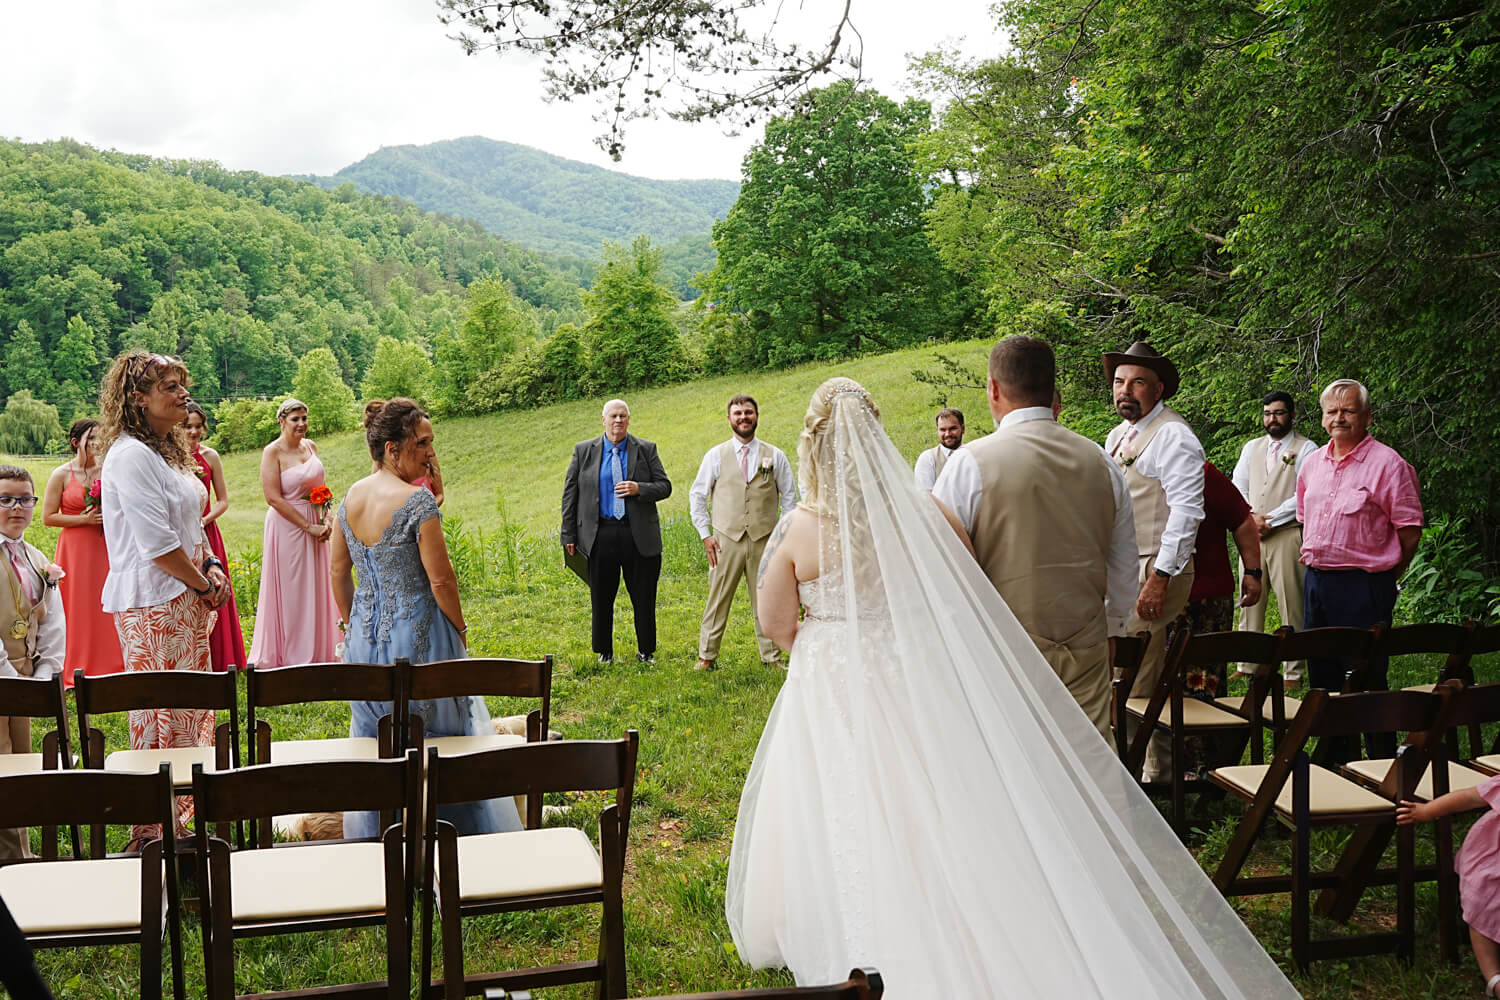 Bride escorted by her father down the aisle at a mountain view ceremony site in a field